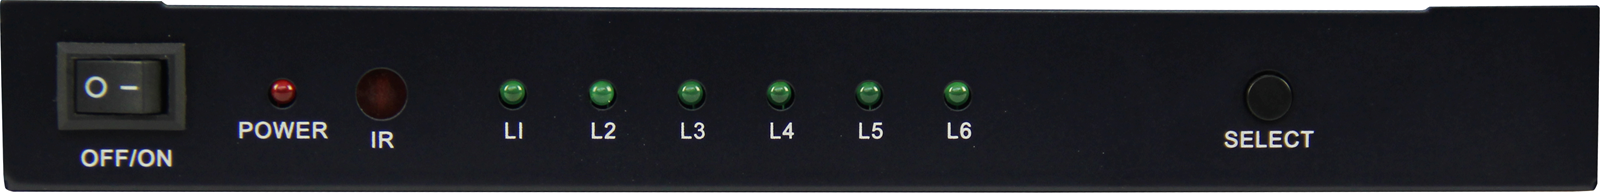 HDMI switchsplitter 2x4 with audio output